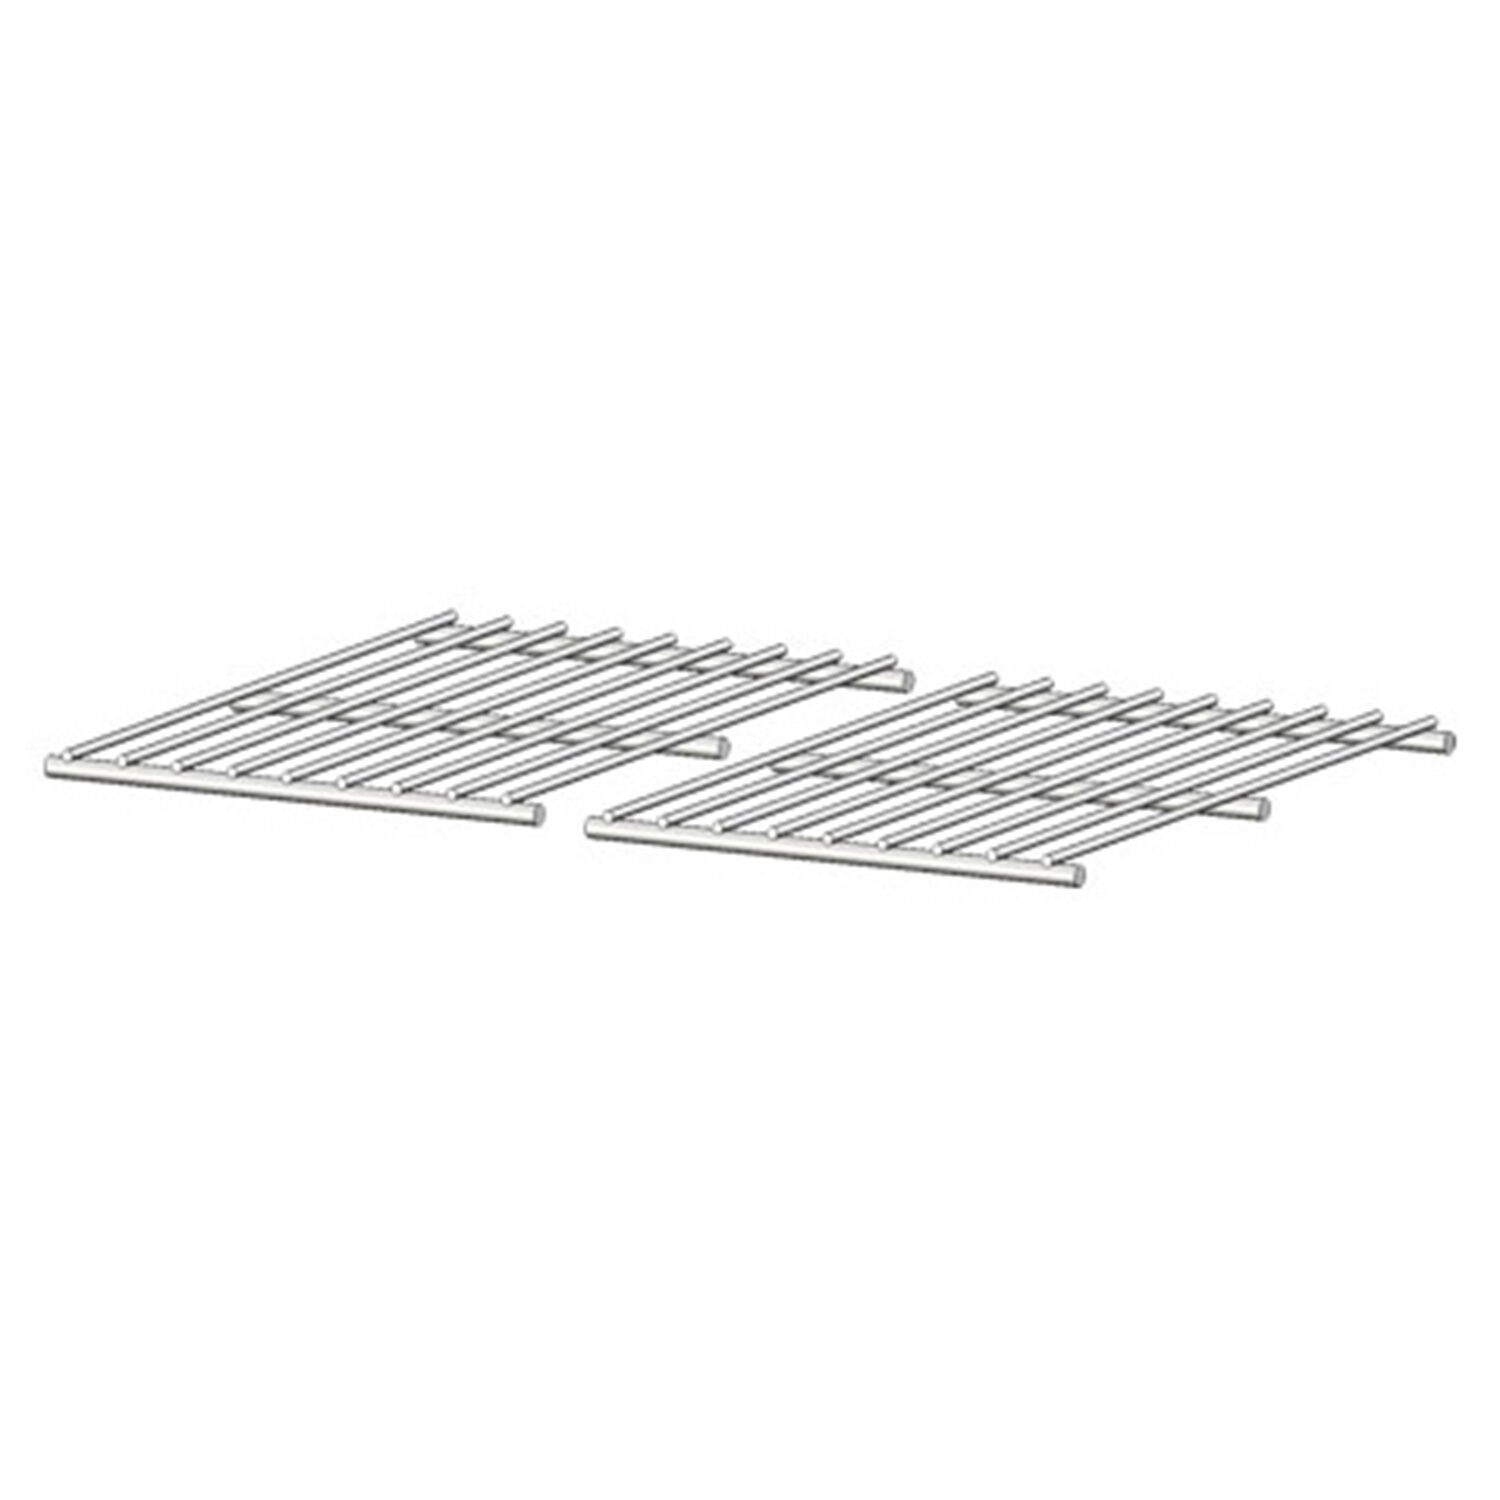 Magma Grills 10-153 Replacement Cooking Grate For 15" Kettle Grills 